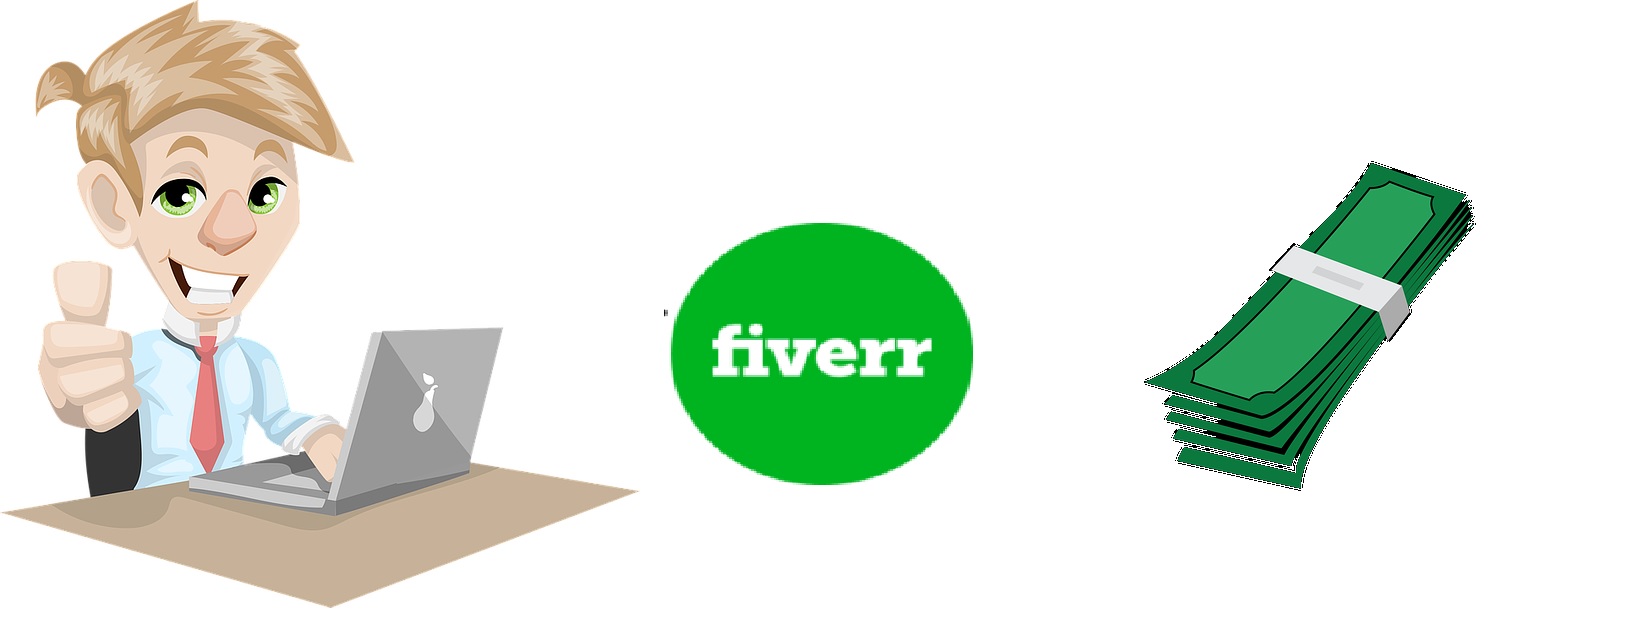 How To Work With Fiverr?